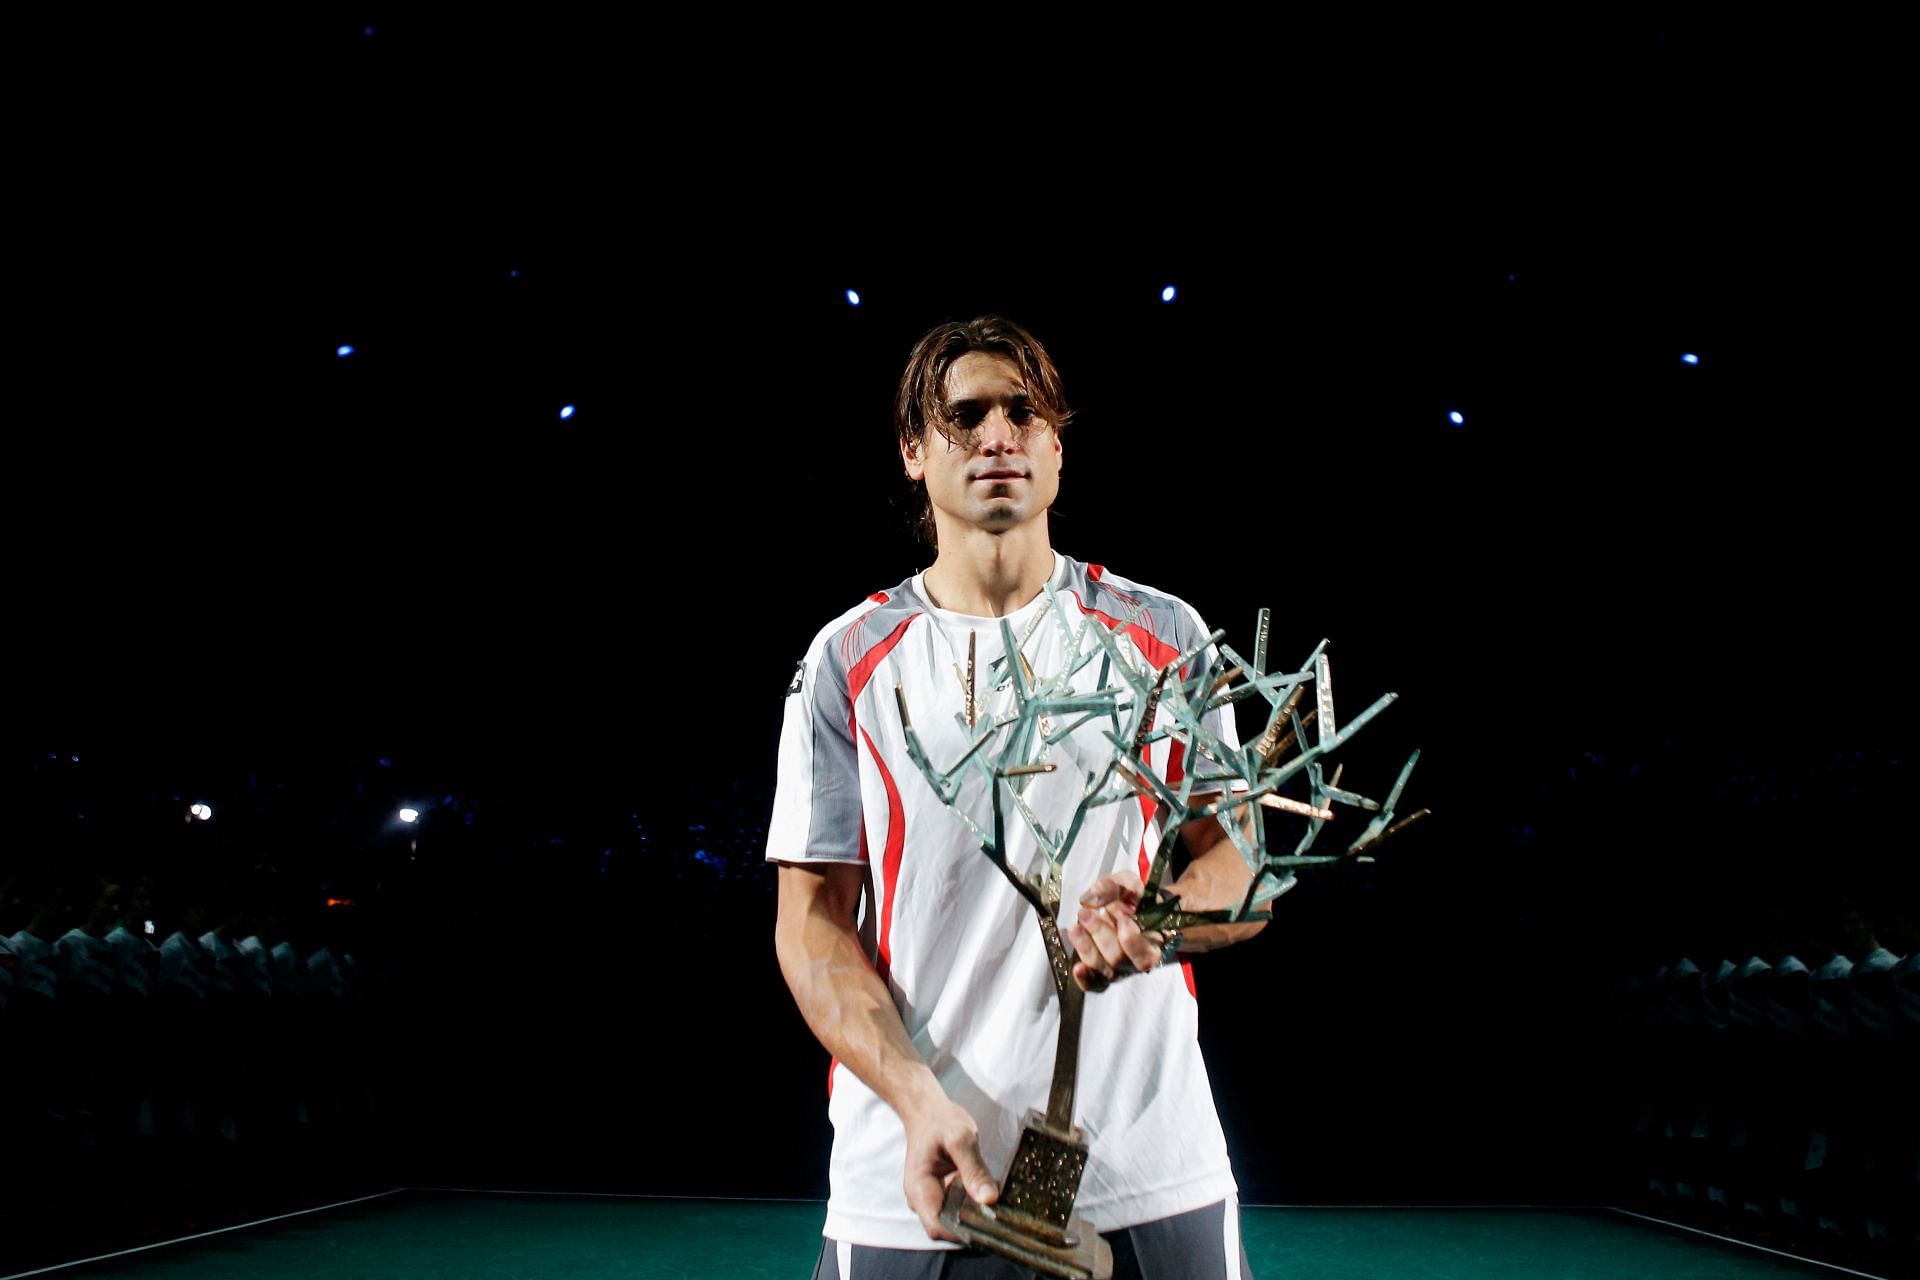 David Ferrer at the 2012 BNP Paribas Masters - Day Seven